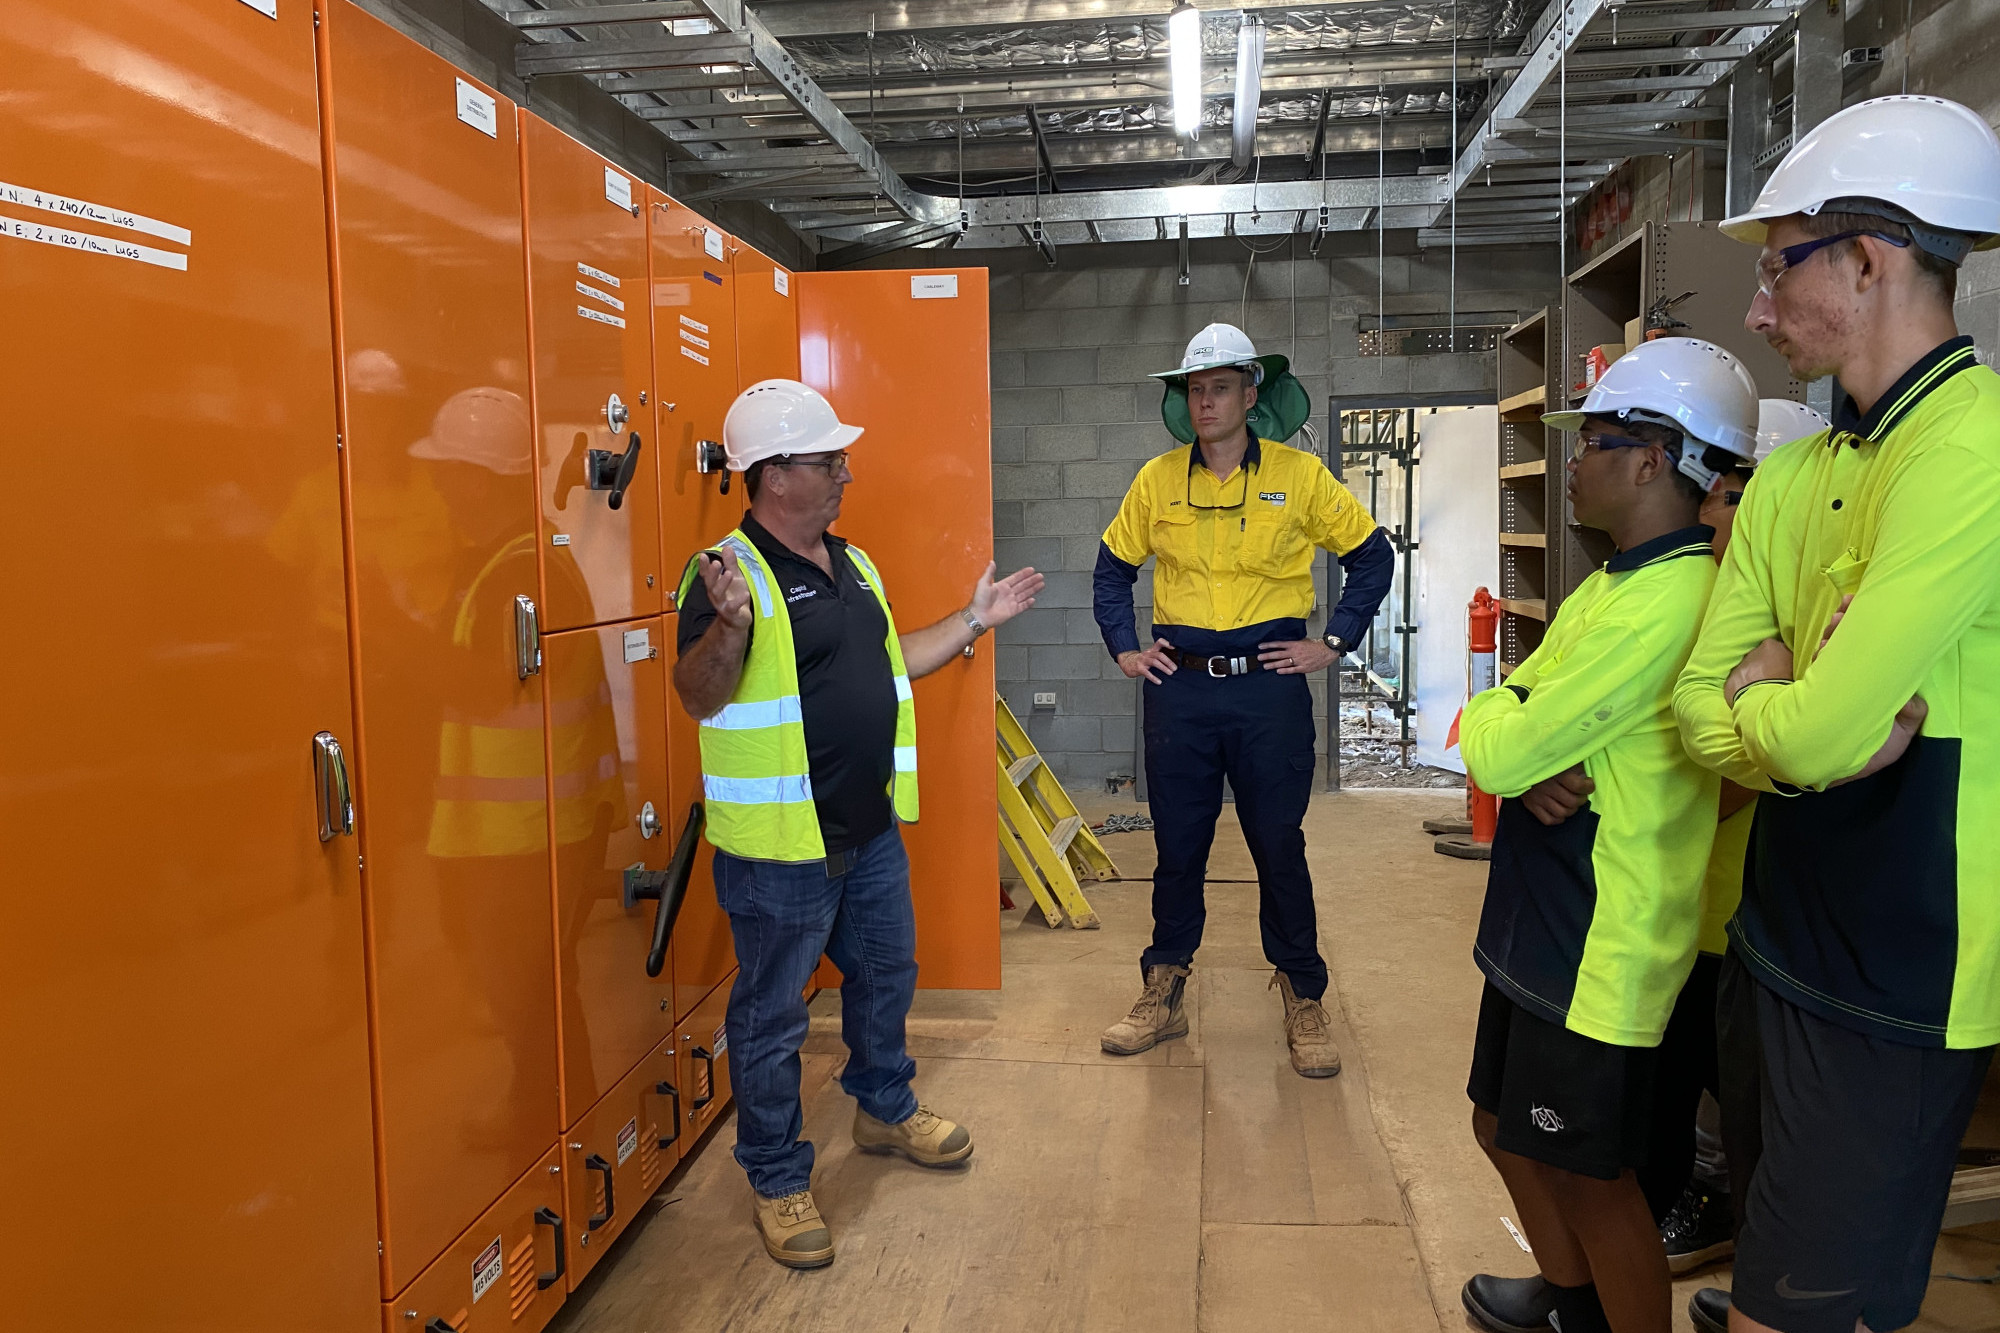 Up and coming tradies were invited along to the Atherton Hospital redevelopment site last Wednesday to ‘Try a Trade’, giving them time off school and time on the job.